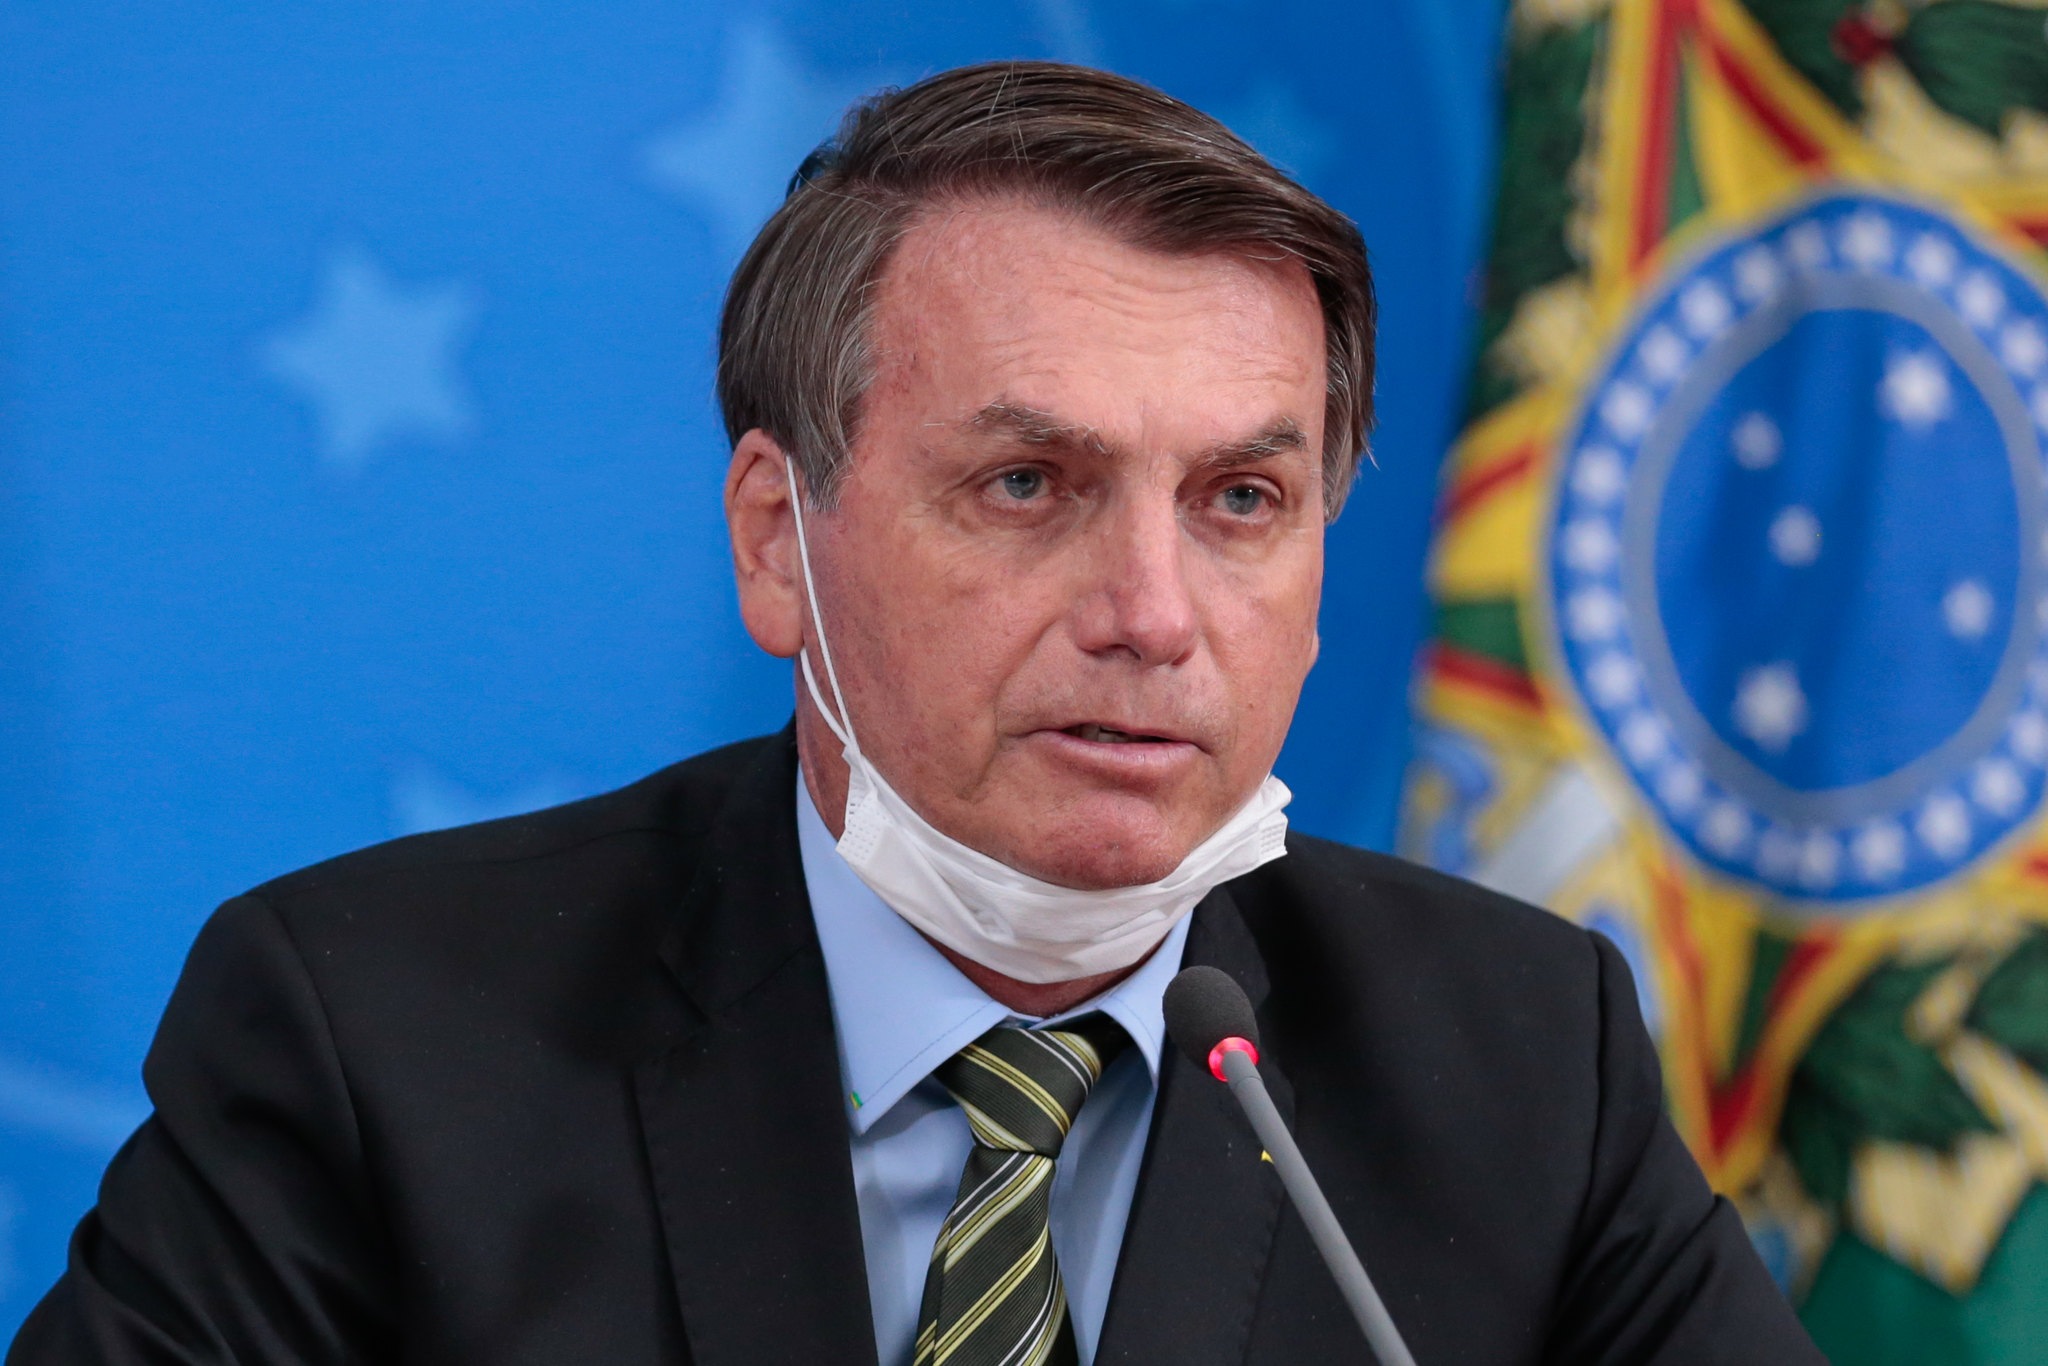 Brazilian President Jair Bolsonaro himself spoke on national television last Tuesday to criticize the shutdown of commercial spaces and schools.